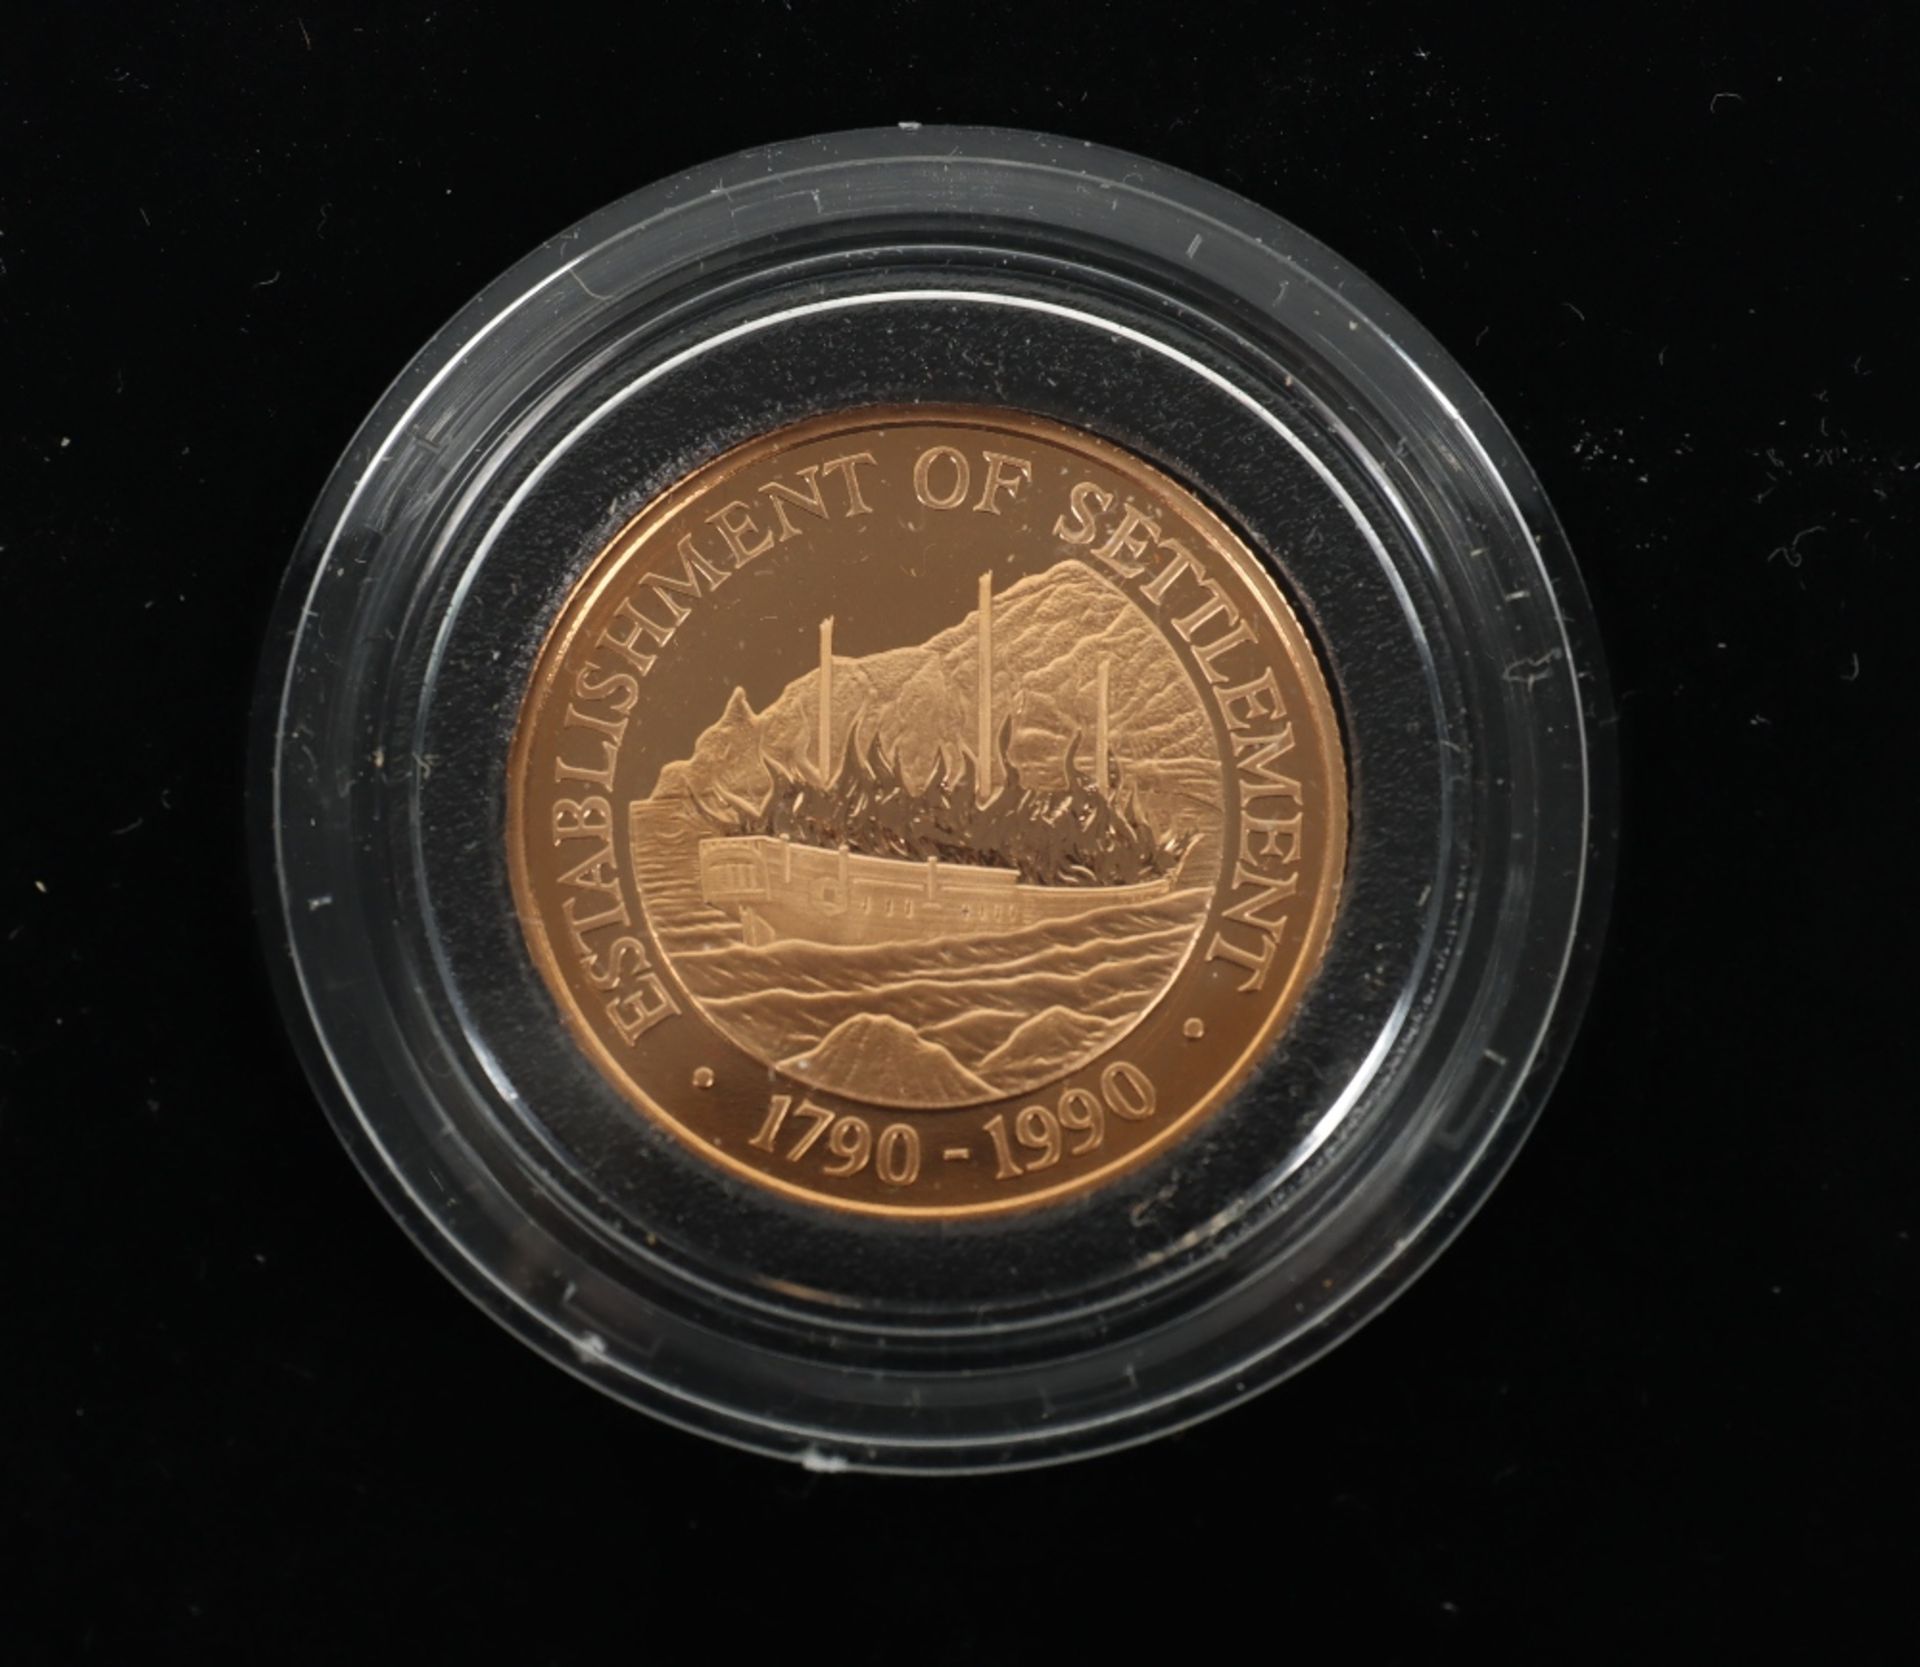 1990 Pitcairn Islands gold proof $250 - Image 3 of 4